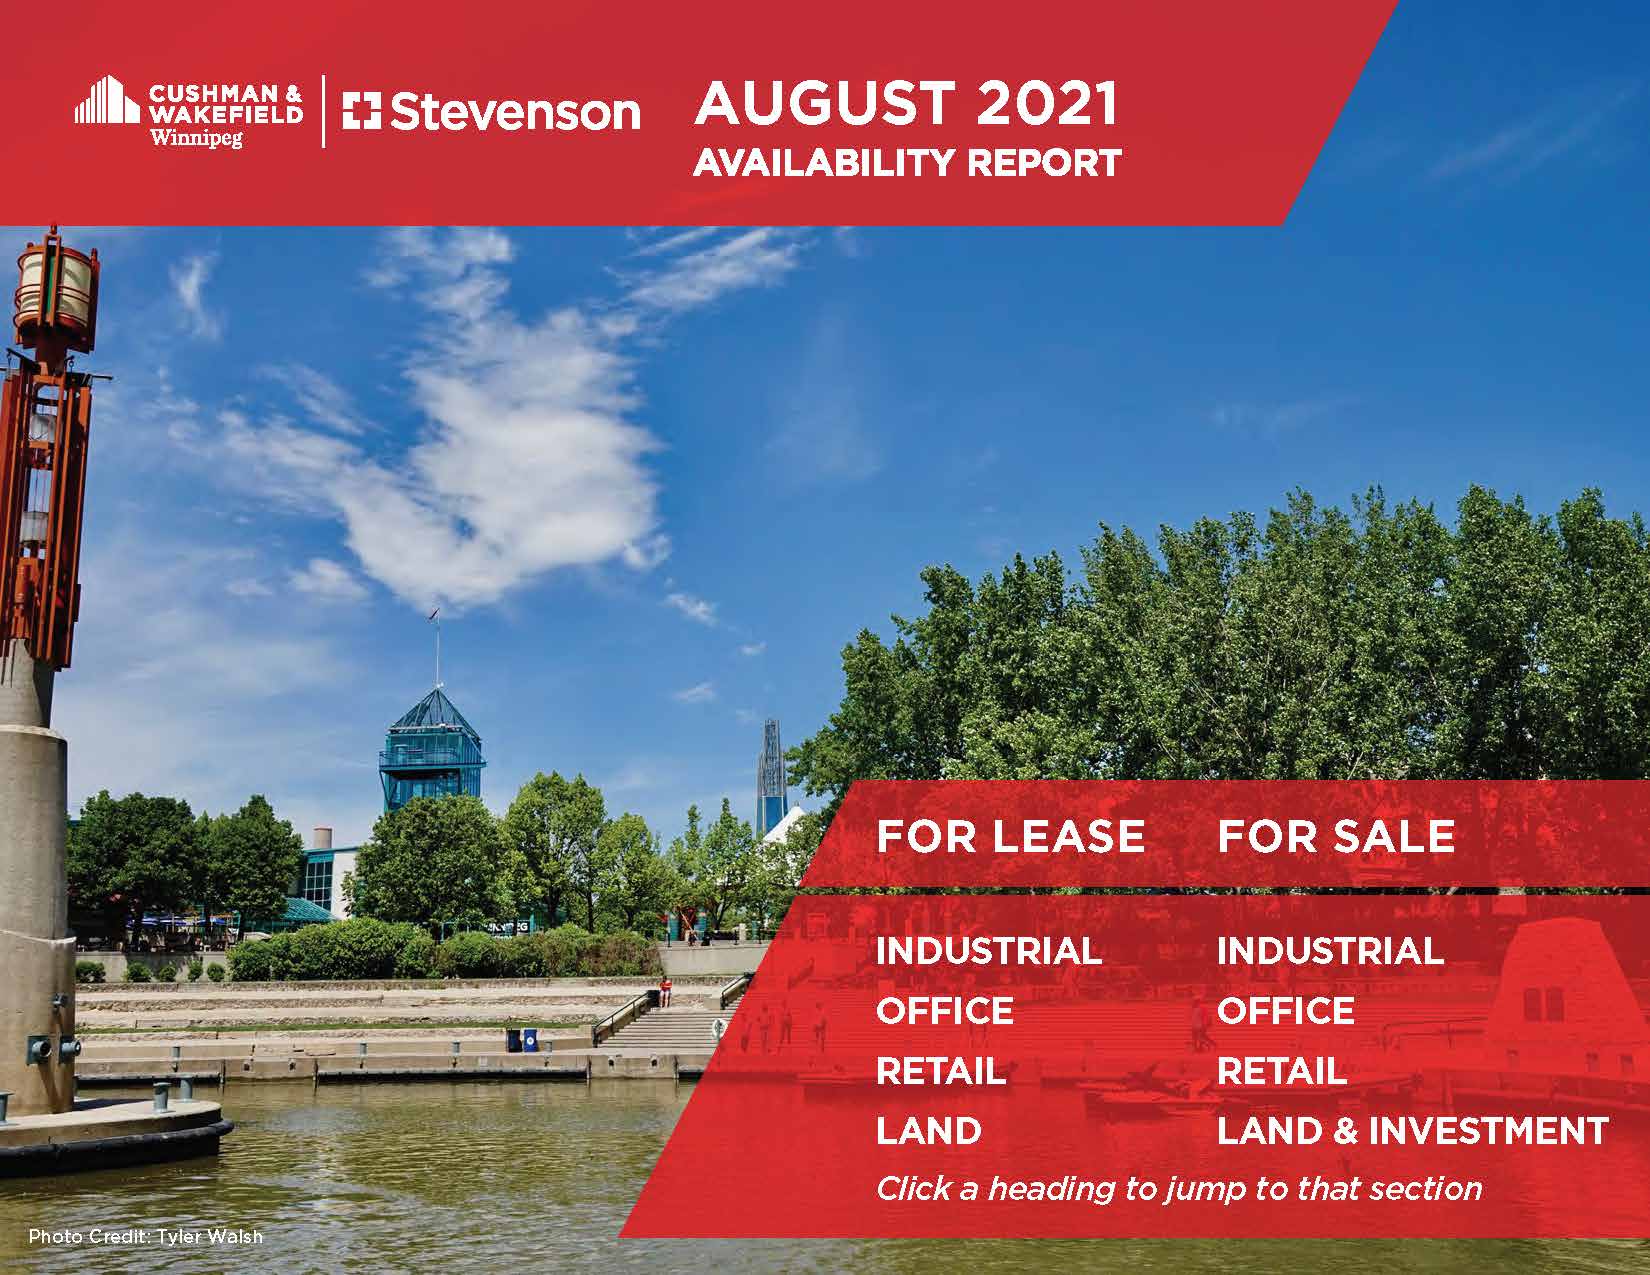 August 2021 available property report CWStevenson office retail land industrial investment